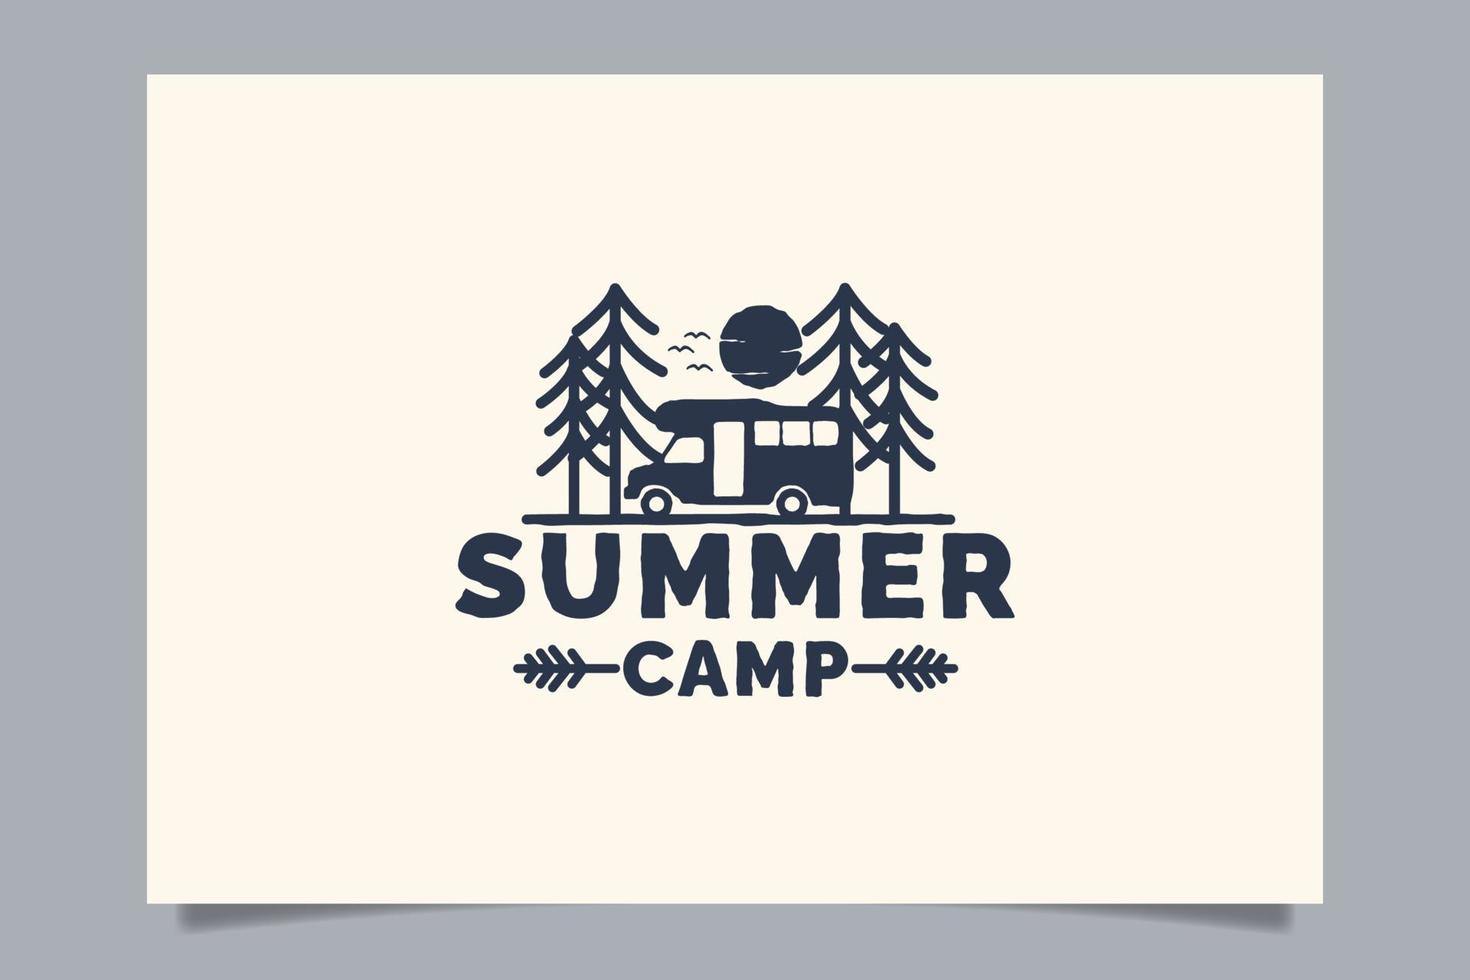 summer camp logo for any business especially for outdoor activity, summer holiday, sport, adventure, etc. vector